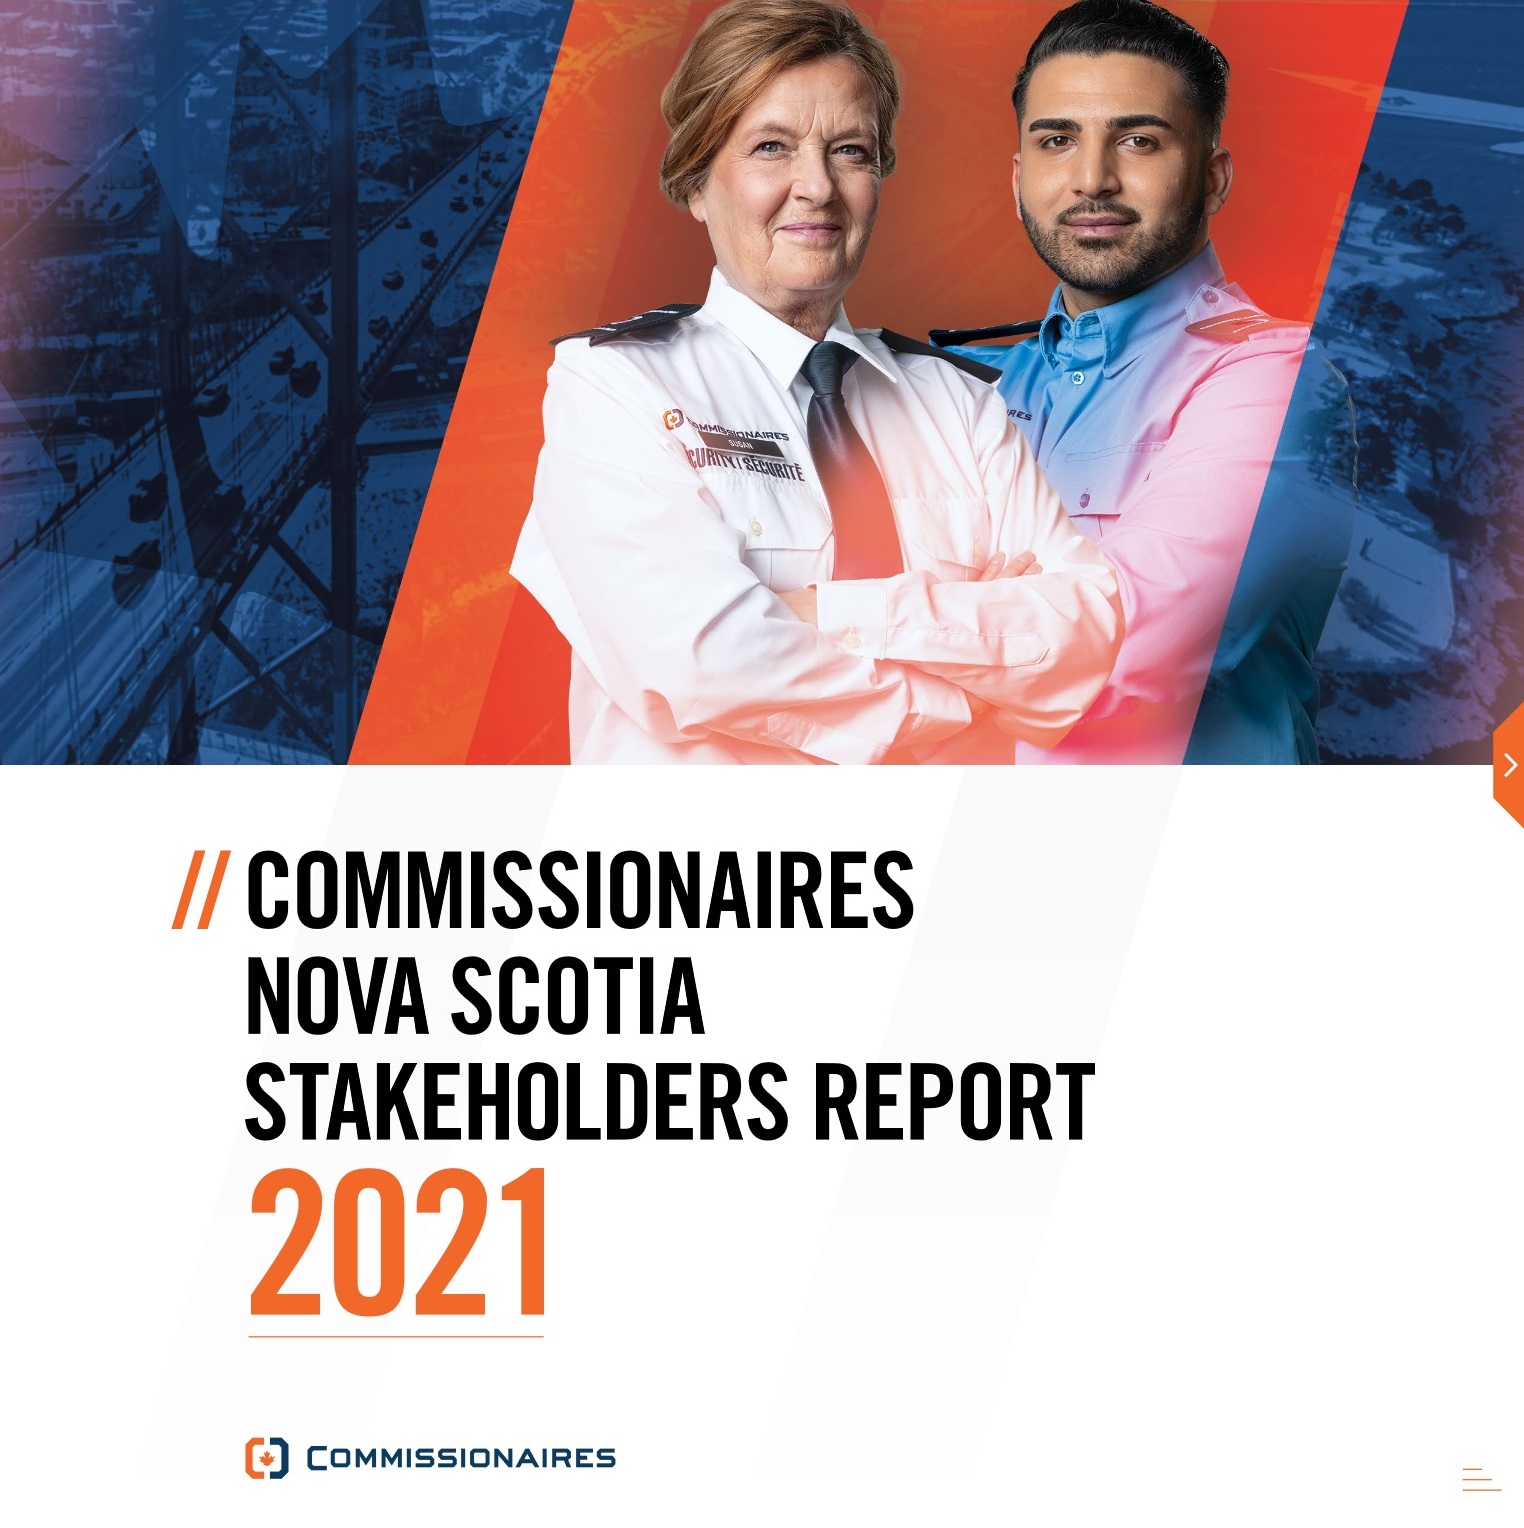 Stakeholders Report 2021 (NS)